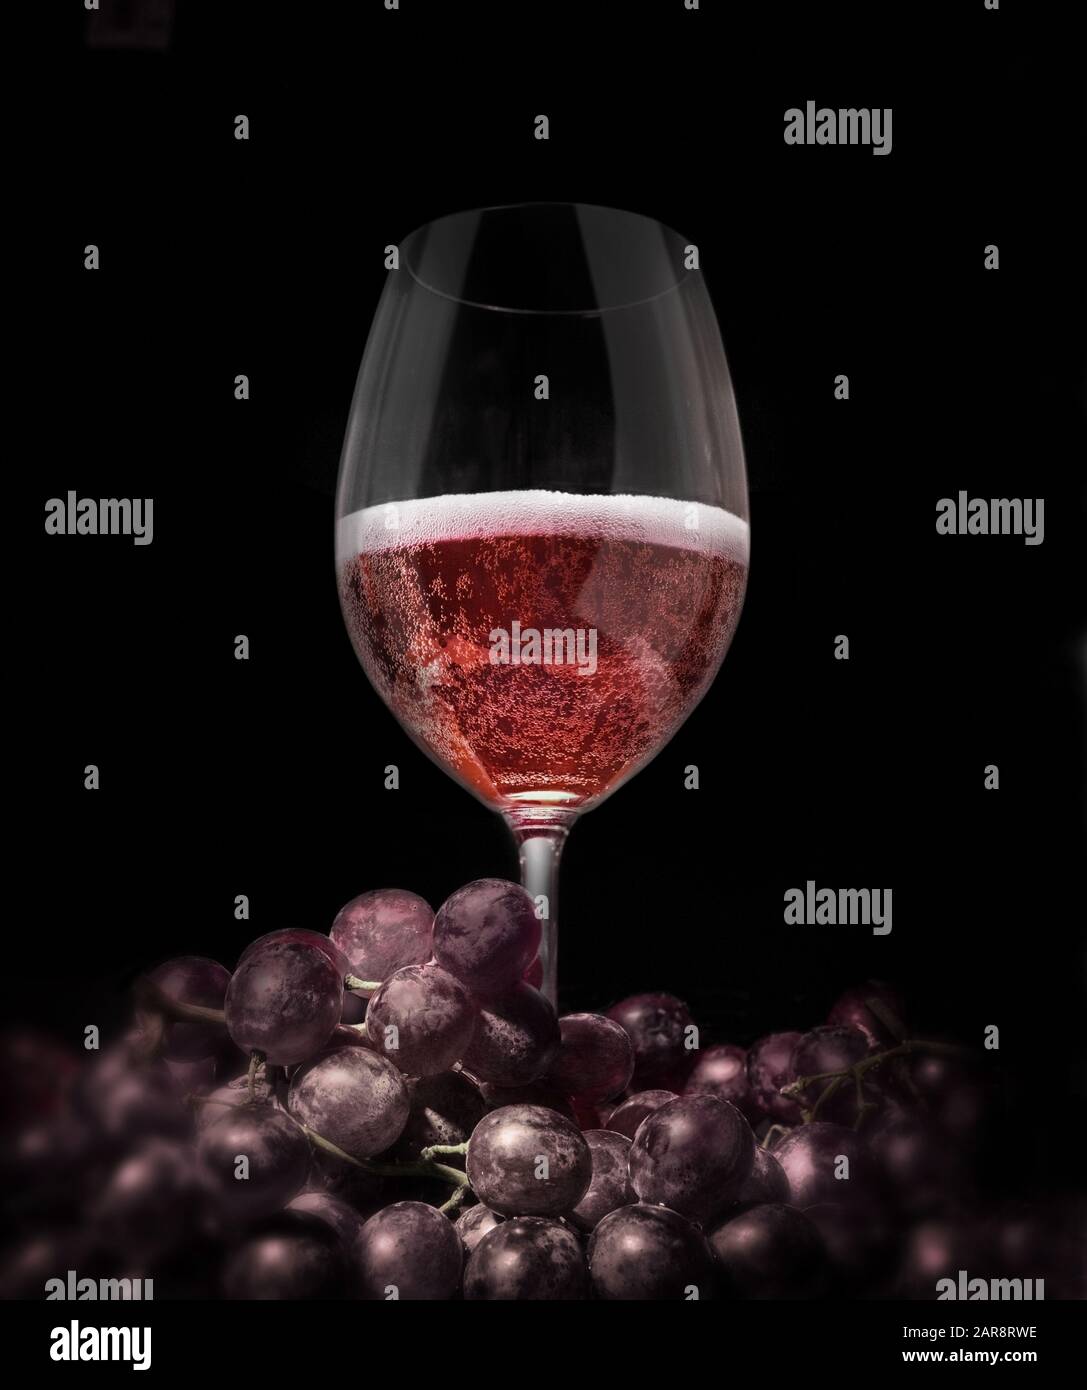 Surrounded by red grapes, a wine glass containing mad wine (sparkling and foam)or some grape beverage..low key, copy-space. Stock Photo